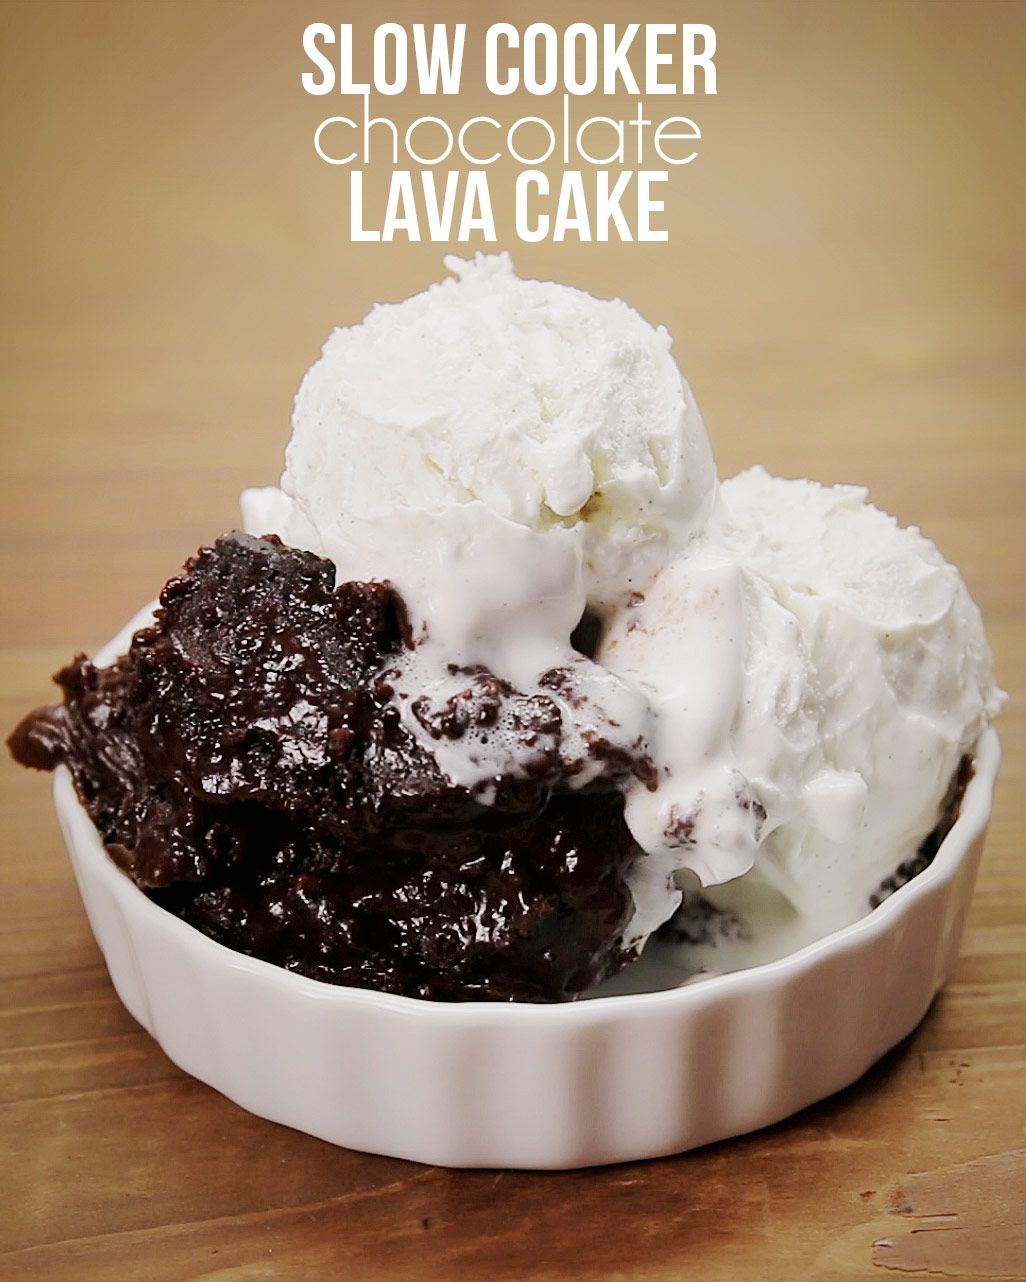 Slow-Cooker Chocolate Lava Cake -   16 slow cooker desserts
 ideas